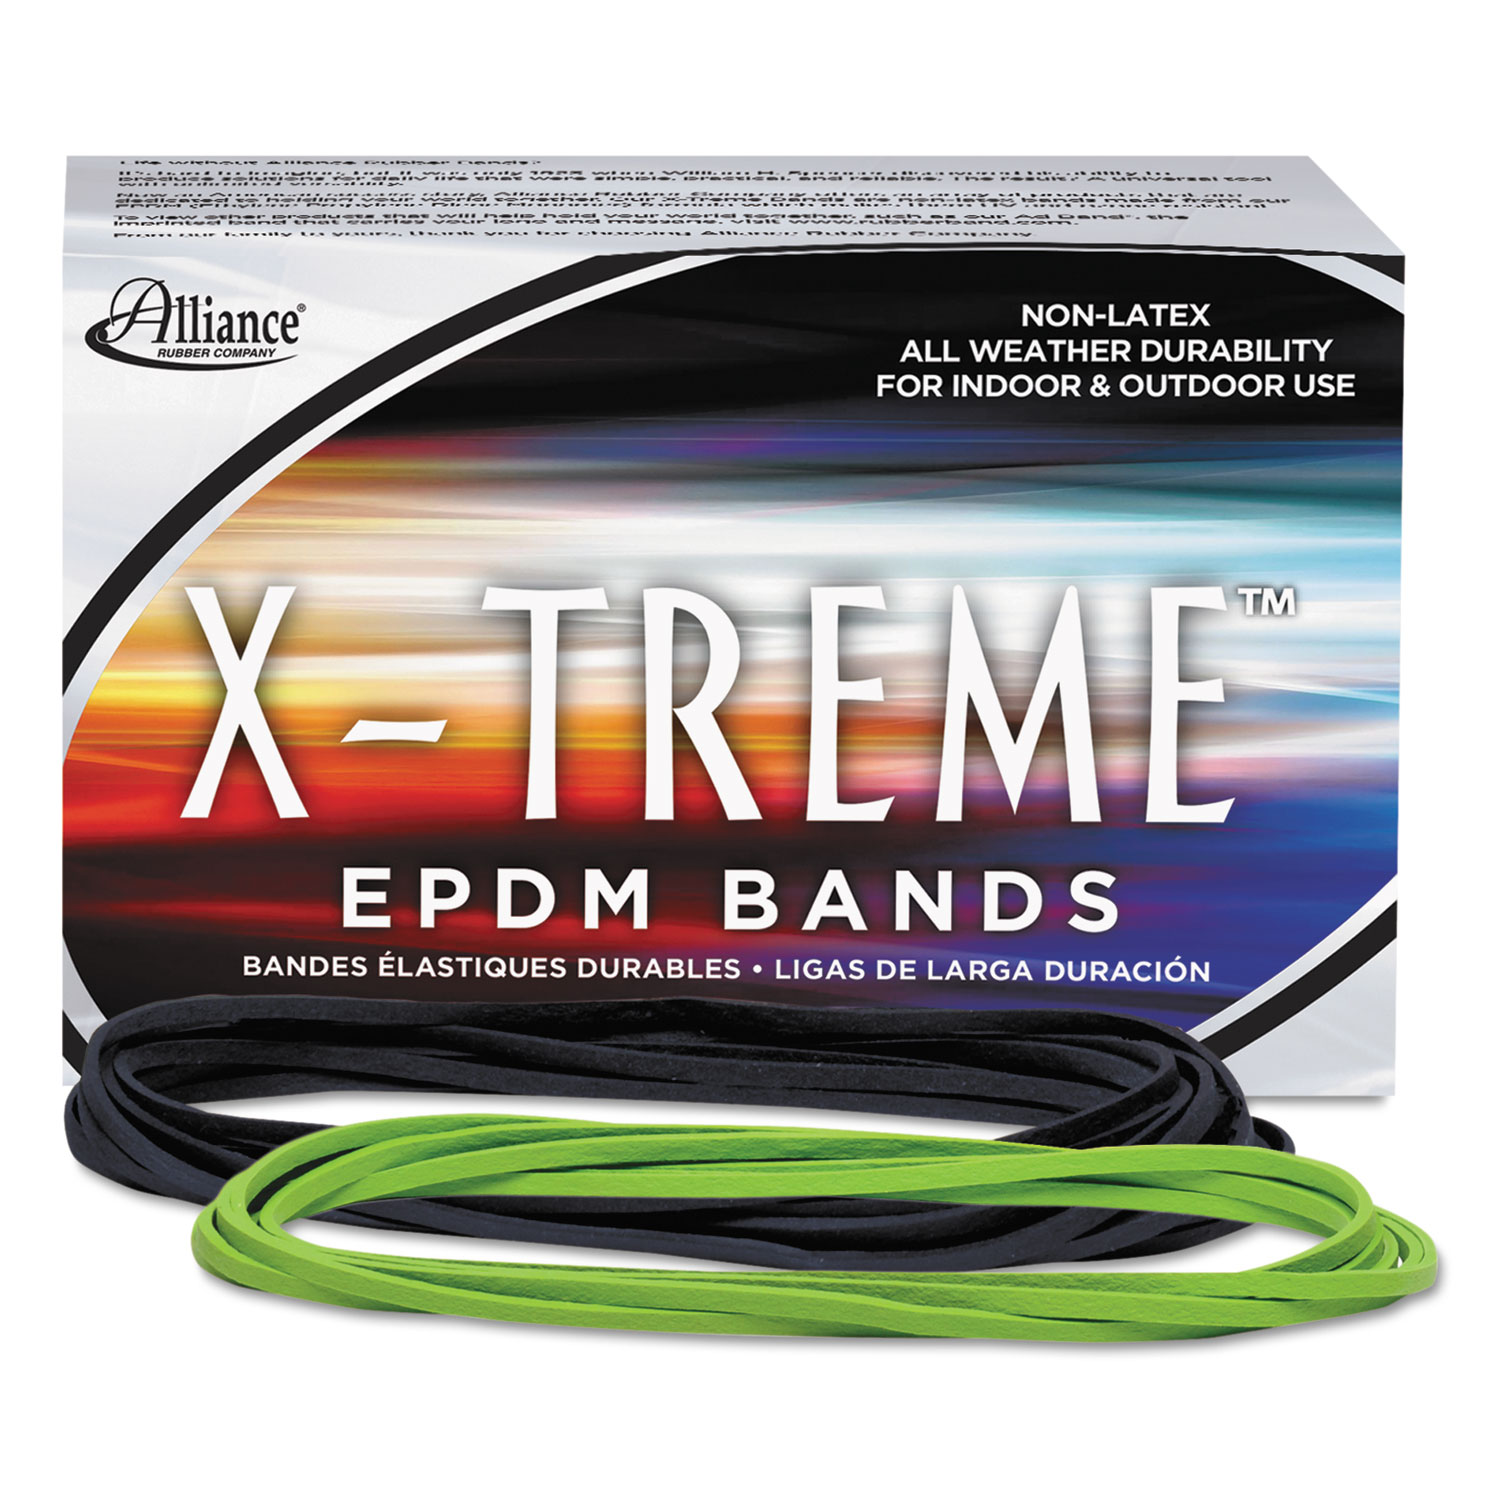  Alliance 02005 X-Treme Rubber Bands, Size 117B, 0.08 Gauge, Lime Green, 1 lb Box, 200/Box (ALL02005) 